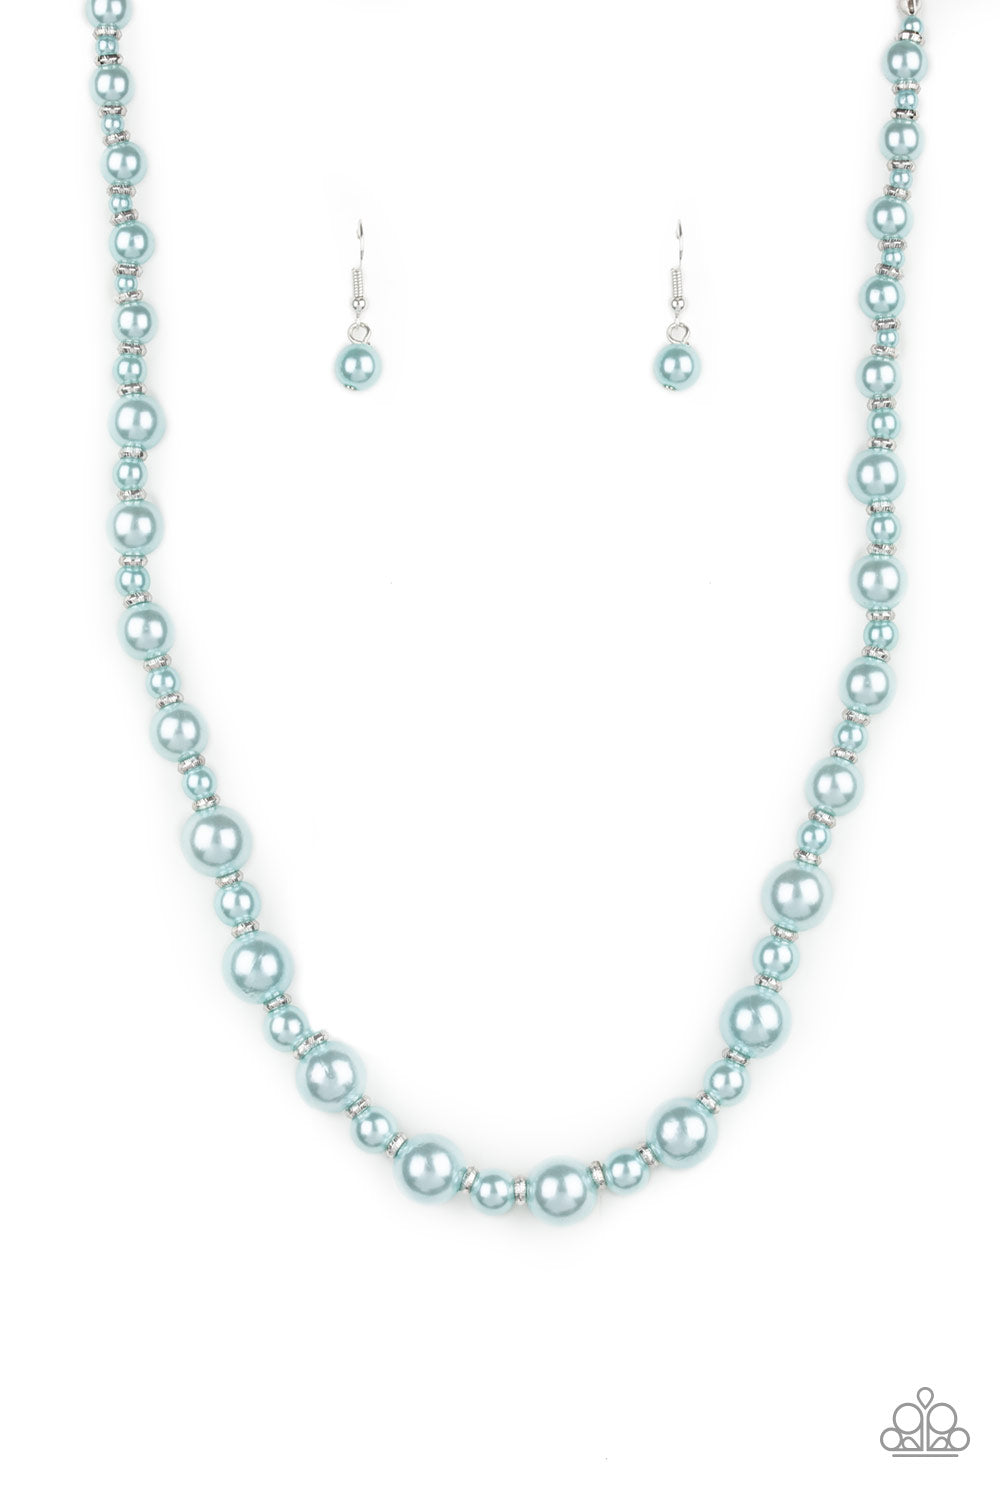 Paparazzi Accessories: Challenge Accepted - Gold Pearl Necklace, Pearl  Accessories - valleyresorts.co.uk